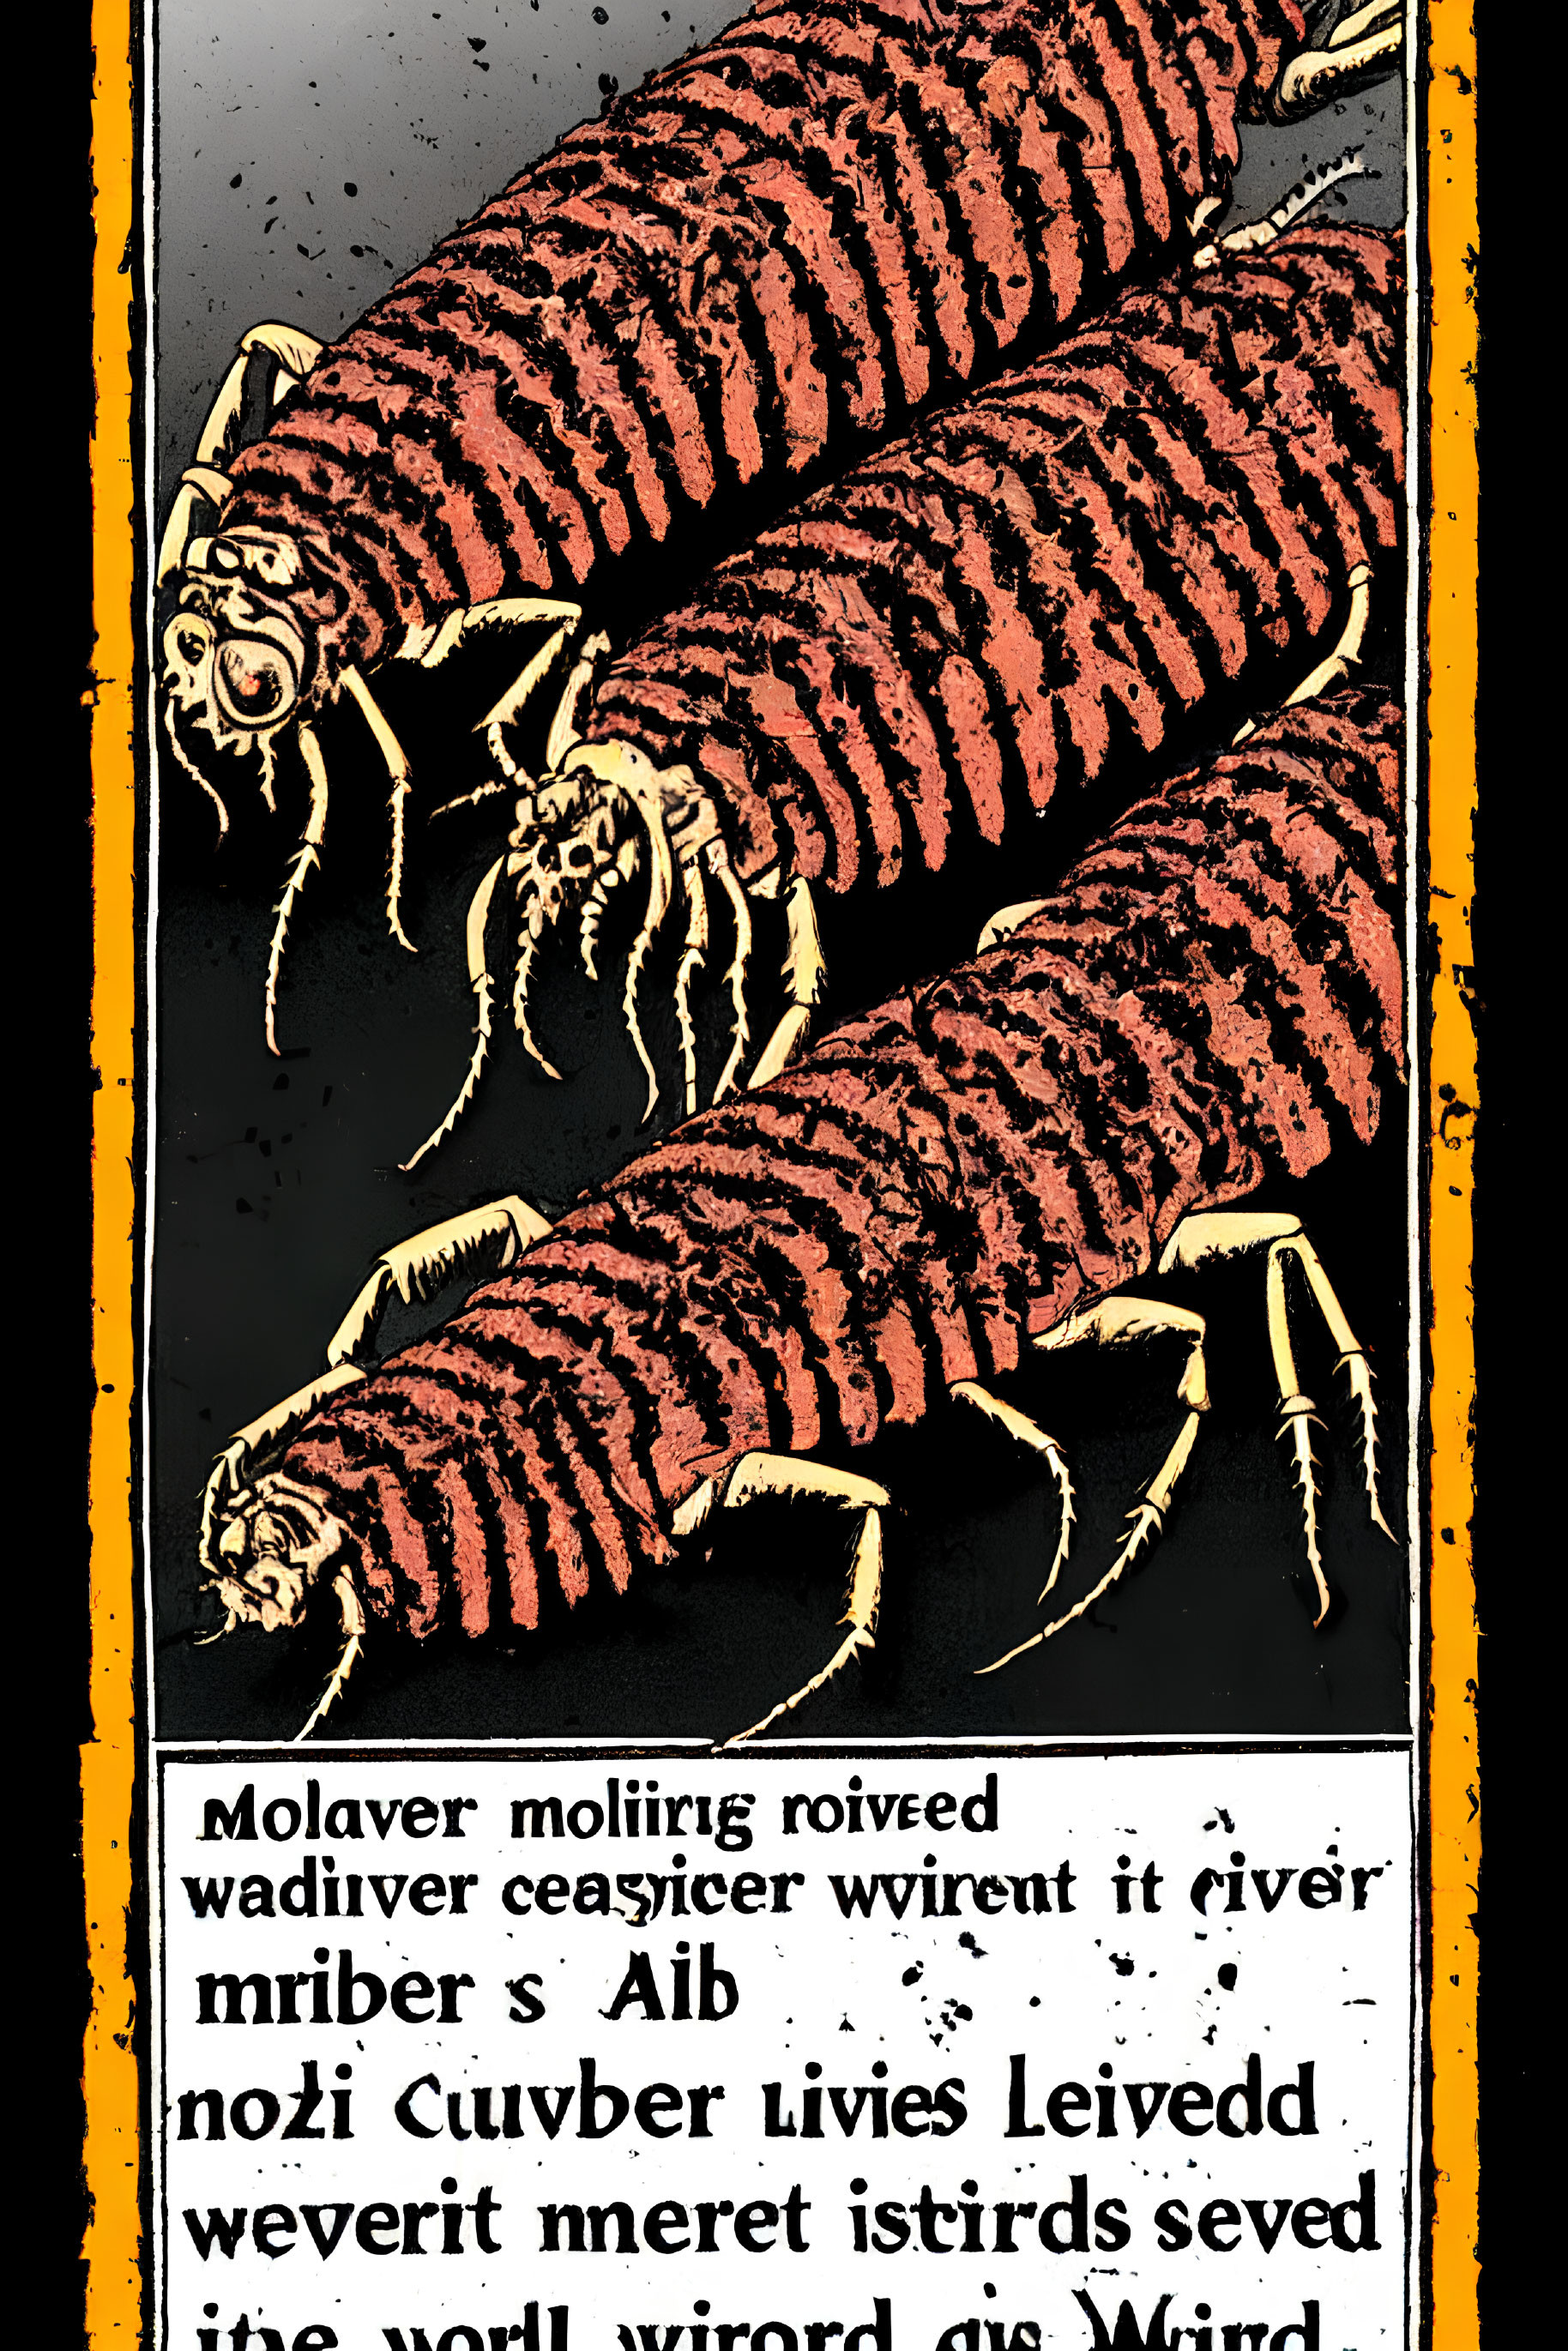 Detailed red centipedes on textured yellow and black background with illegible text.